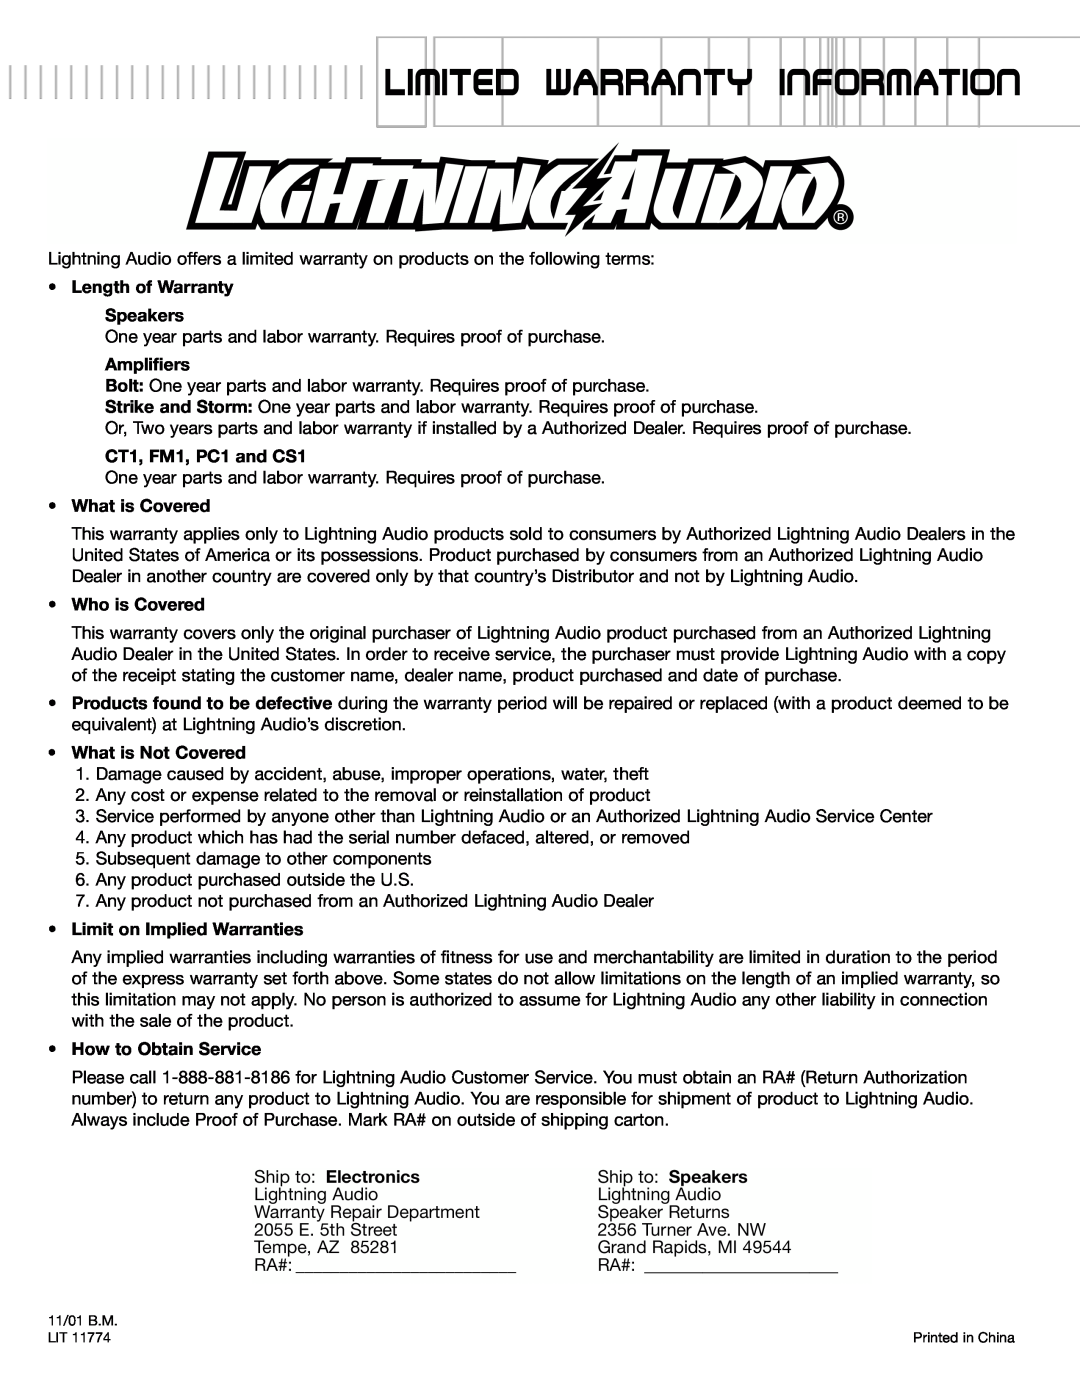 Lightning Audio S3.12.4 manual Limited WArrAnty InformAtion, Length of Warranty Speakers, Amplifiers, CT1, FM1, PC1 and CS1 